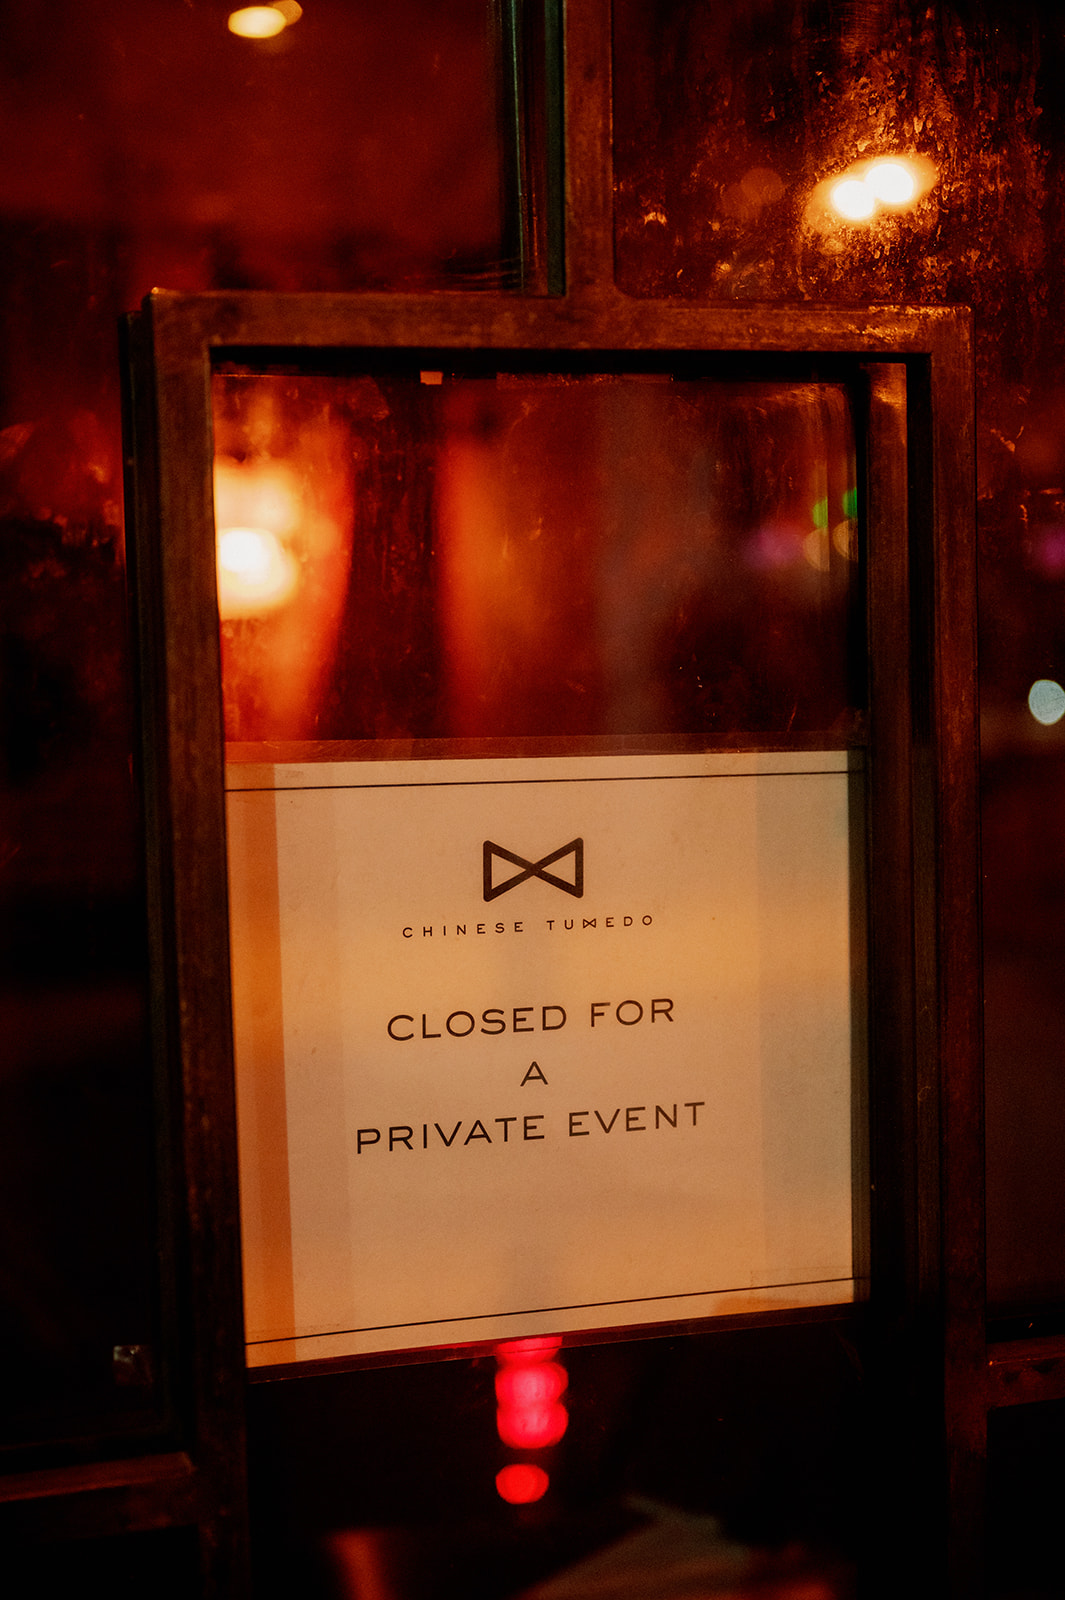 Peachy's Bar "closed for private event" sign in Chinatown.